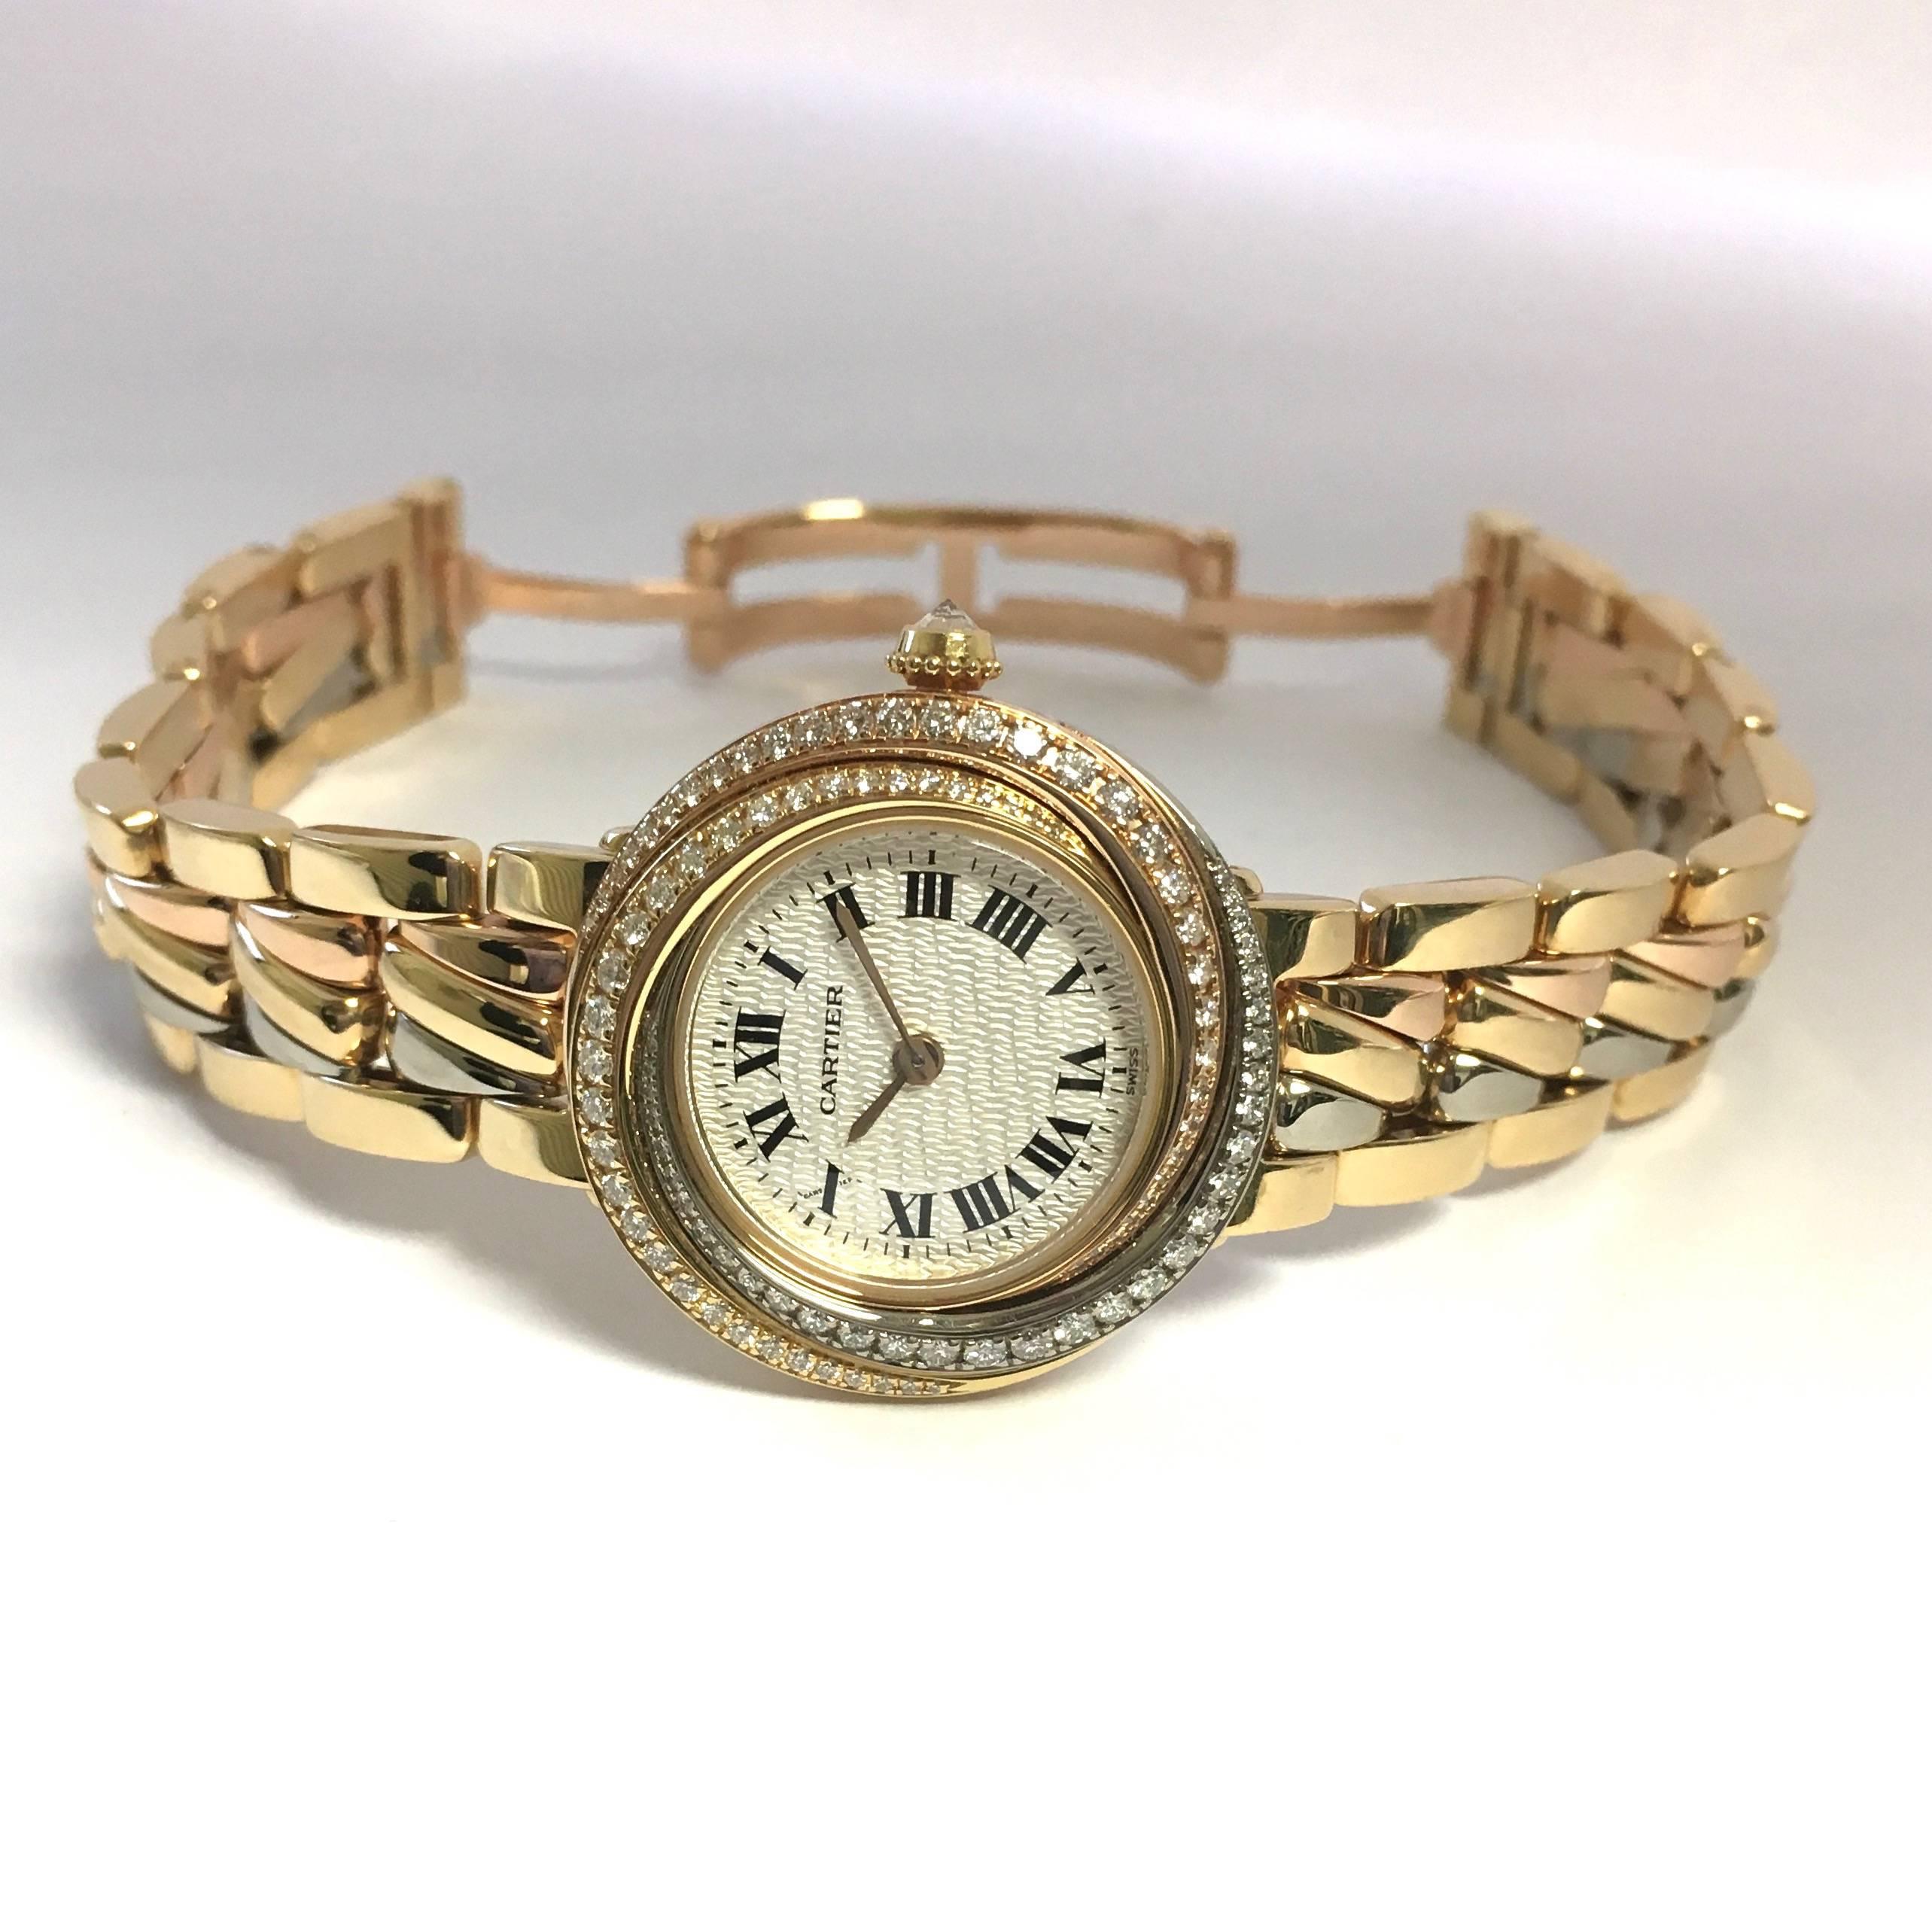 Brand new Cartier Trinity diamond watch with rare yellow, white and rose gold bracelet. 27mm Cartier Trinity watch case with swiss quartz movement, pavé set tri-color bezel with factory diamonds, sapphire crystal, white textured dial, black roman